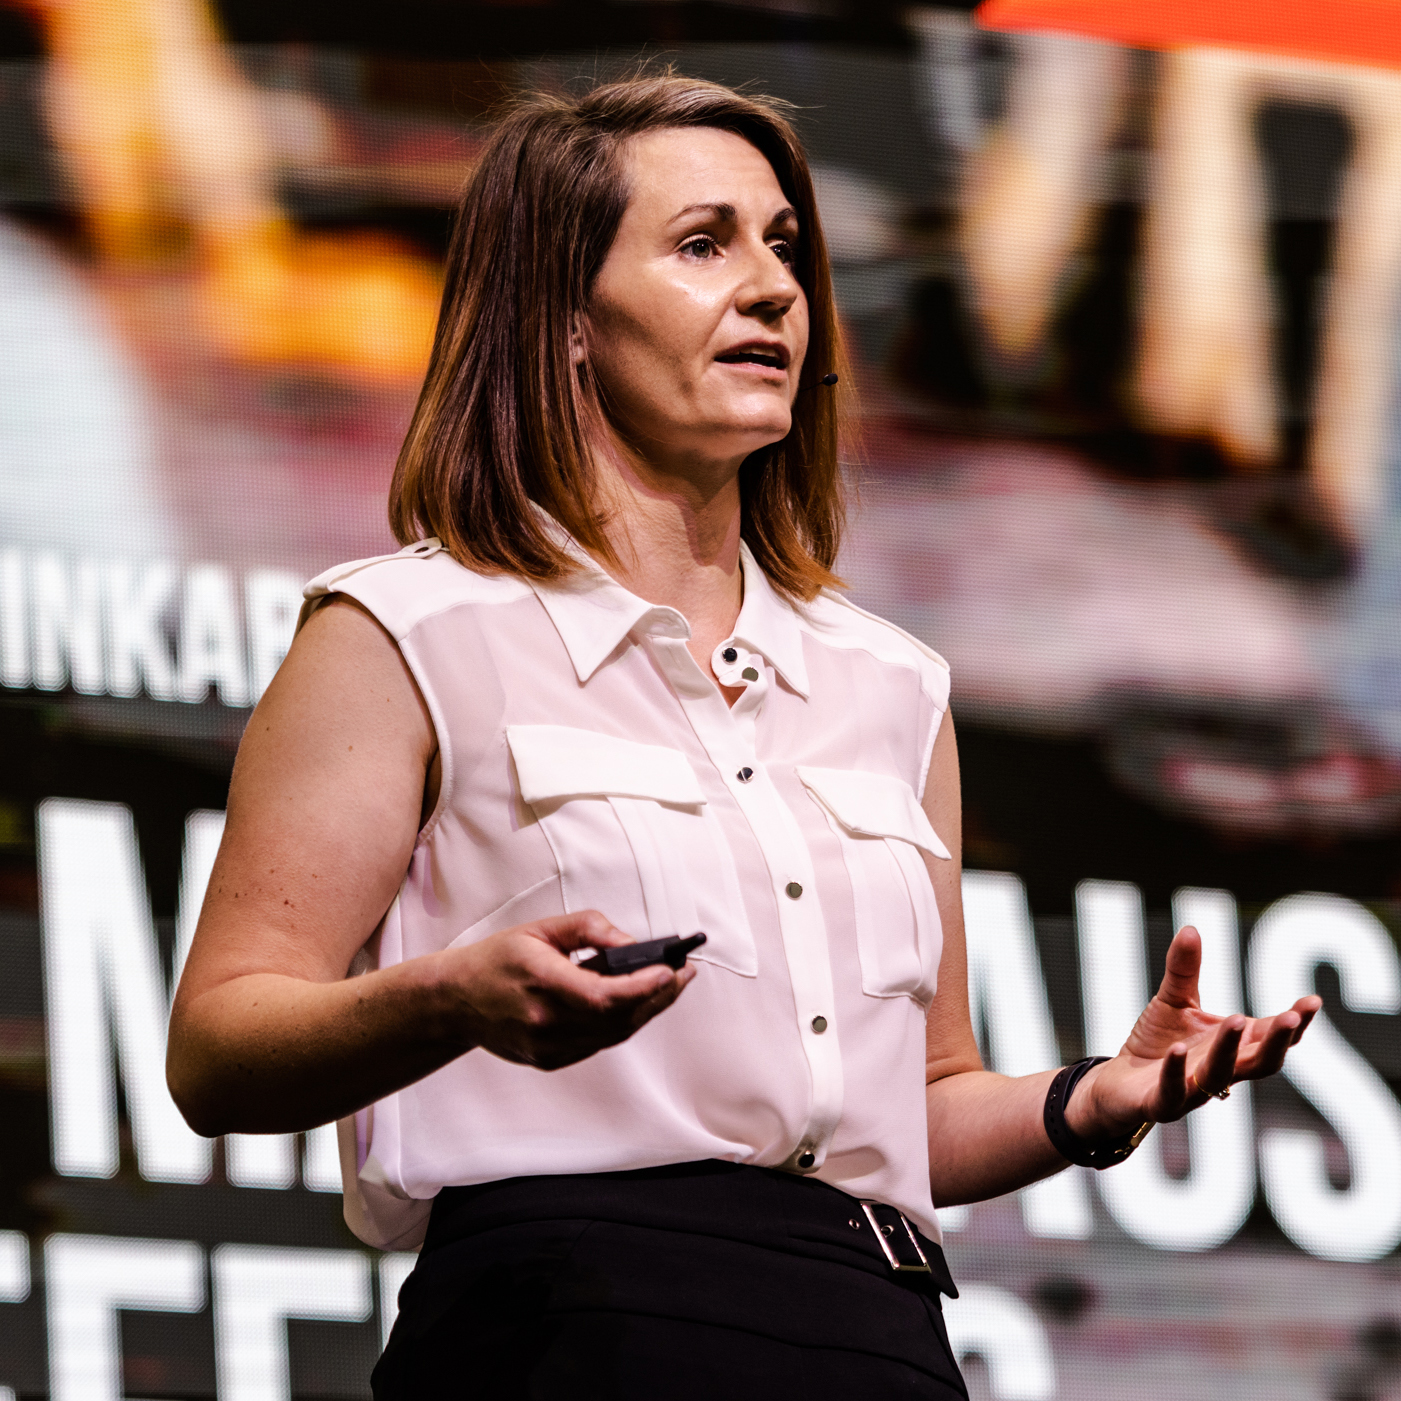 This talk may cause side effects | Kate Faasse